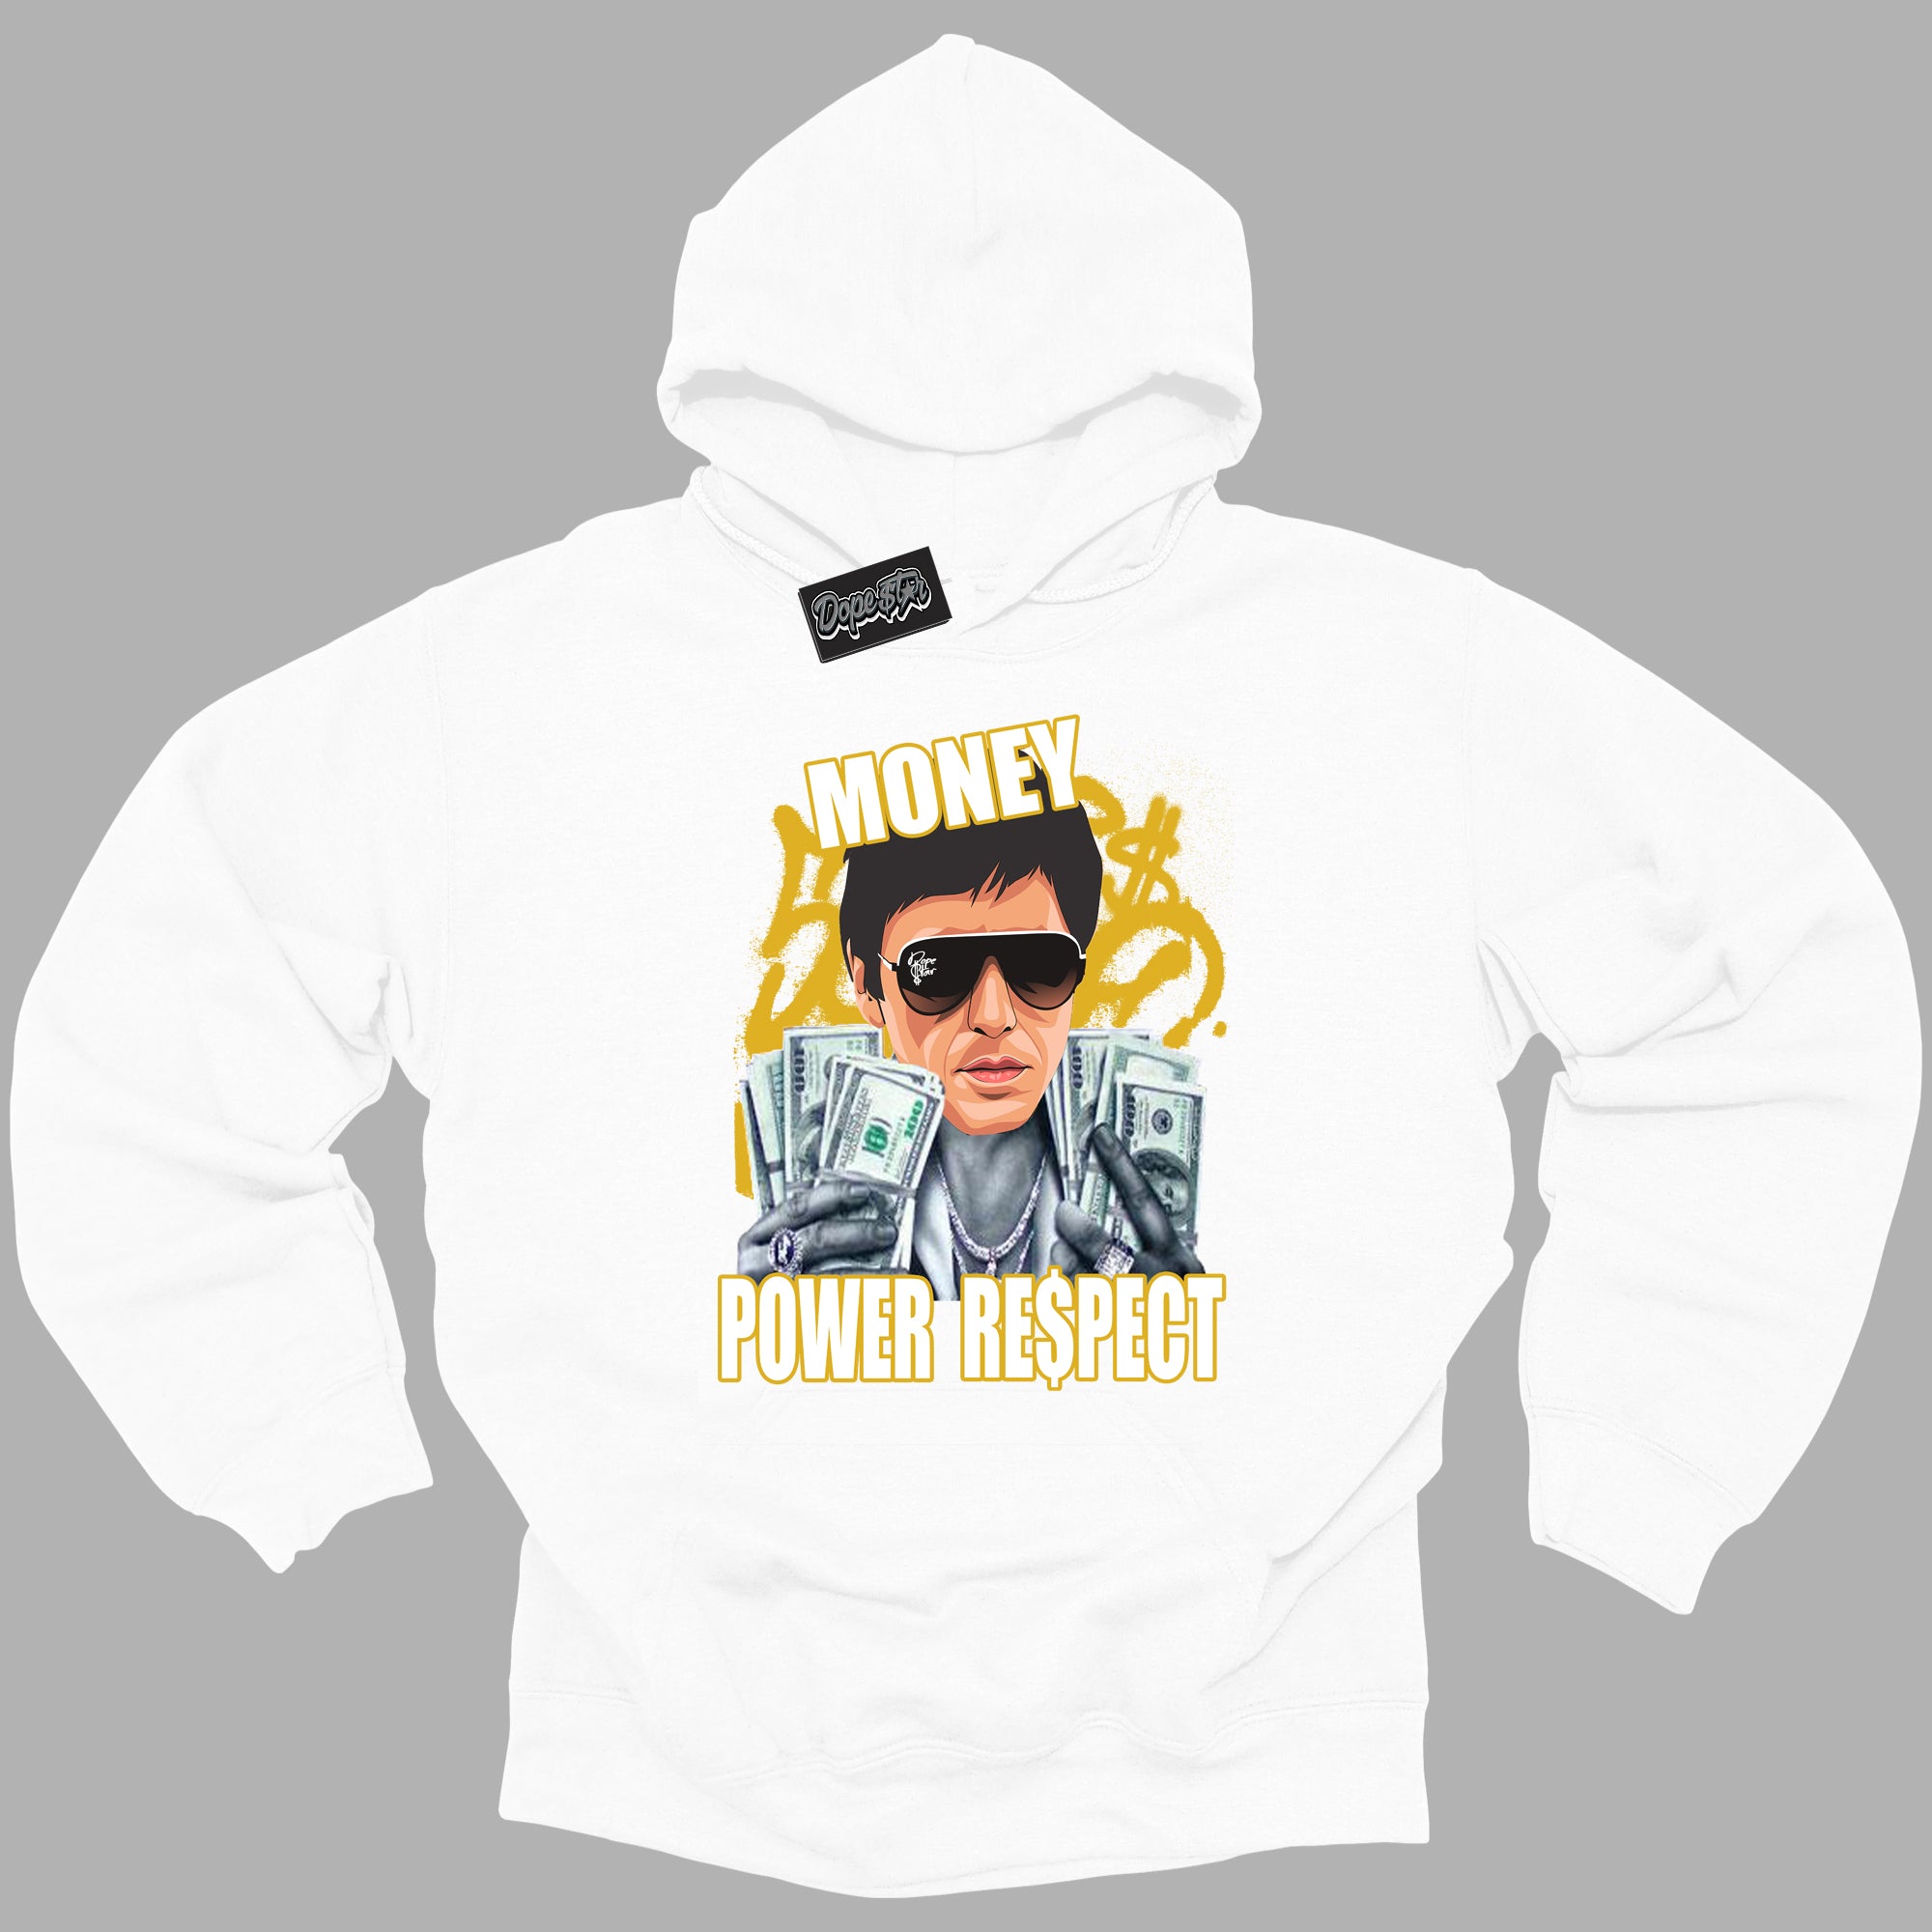 Cool White Hoodie with “ Tony Montana ”  design that Perfectly Matches Yellow Ochre 6s Sneakers.